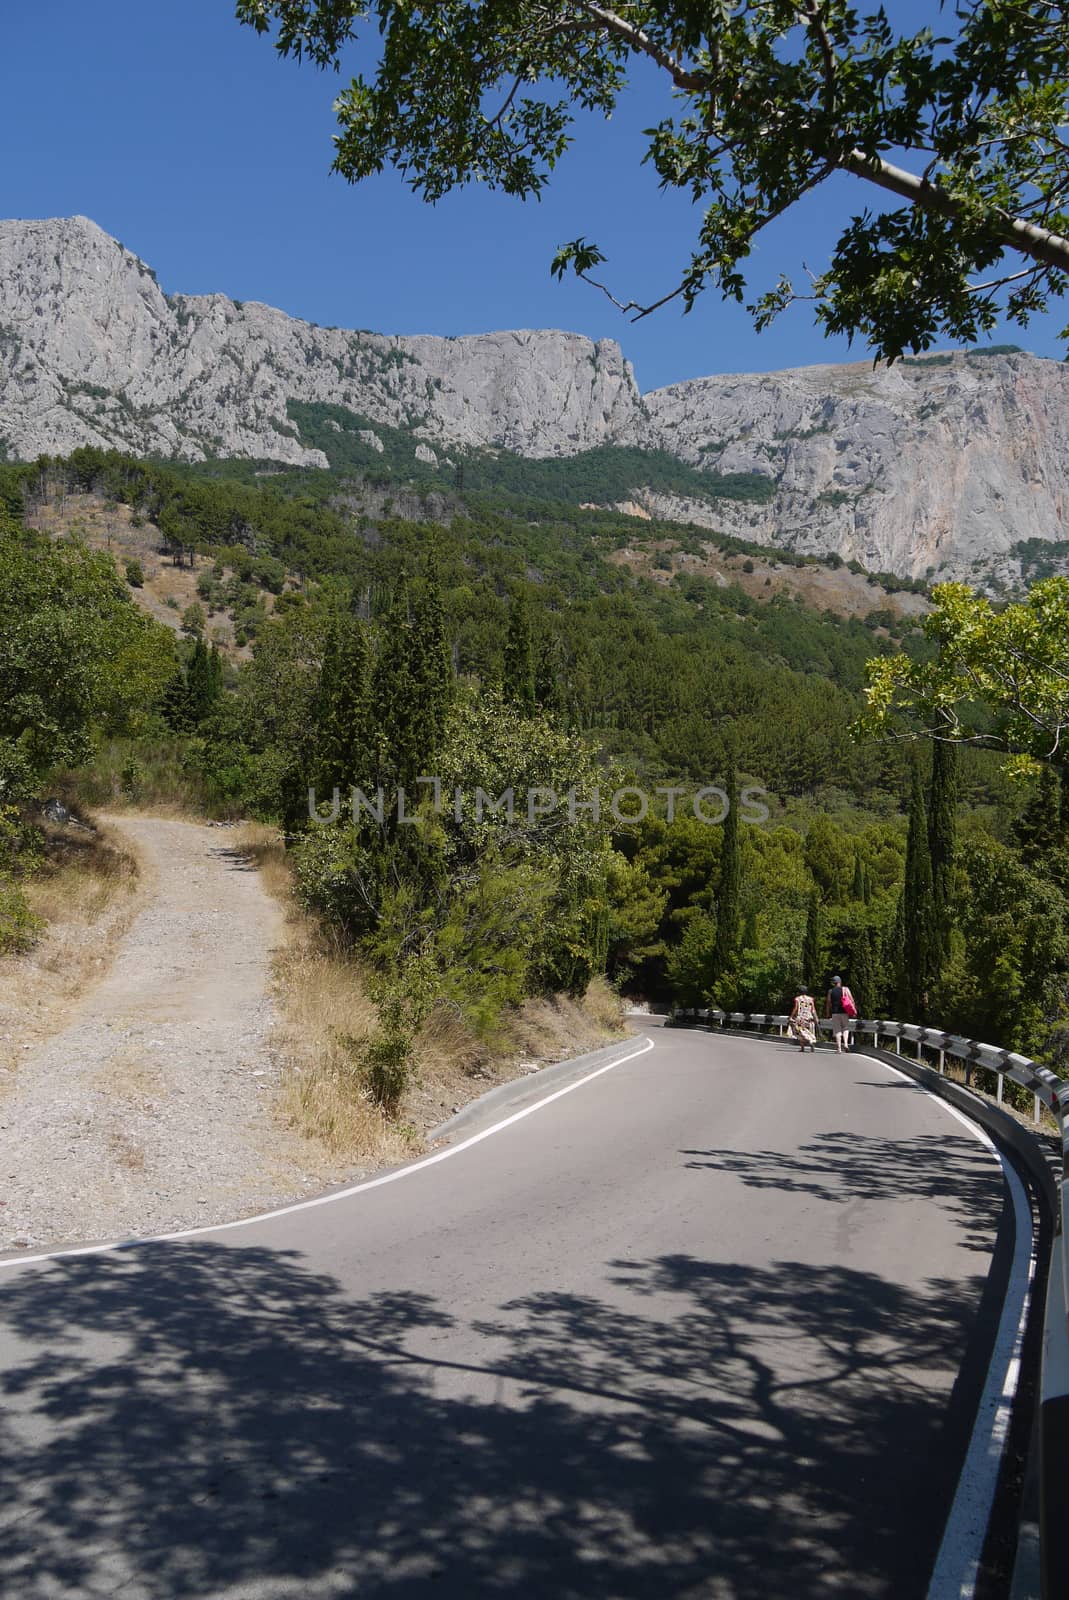 A steep winding road against the backdrop of green trees and high mountains by Adamchuk